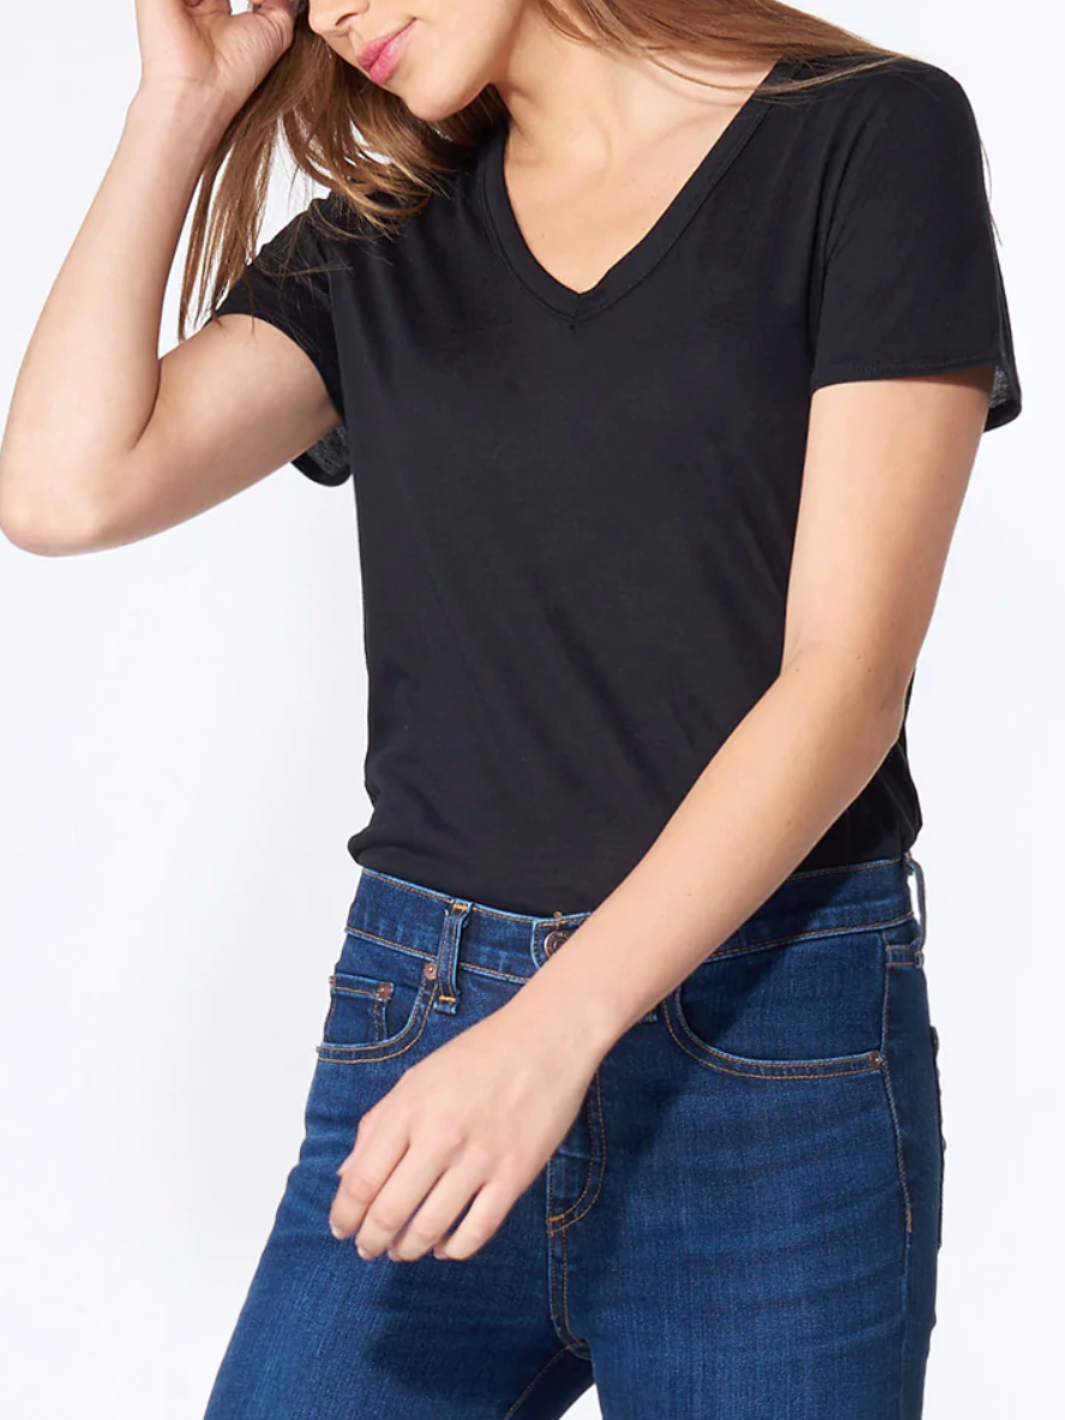 CINDY V-NECK TEE IN BLACK - Romi Boutique